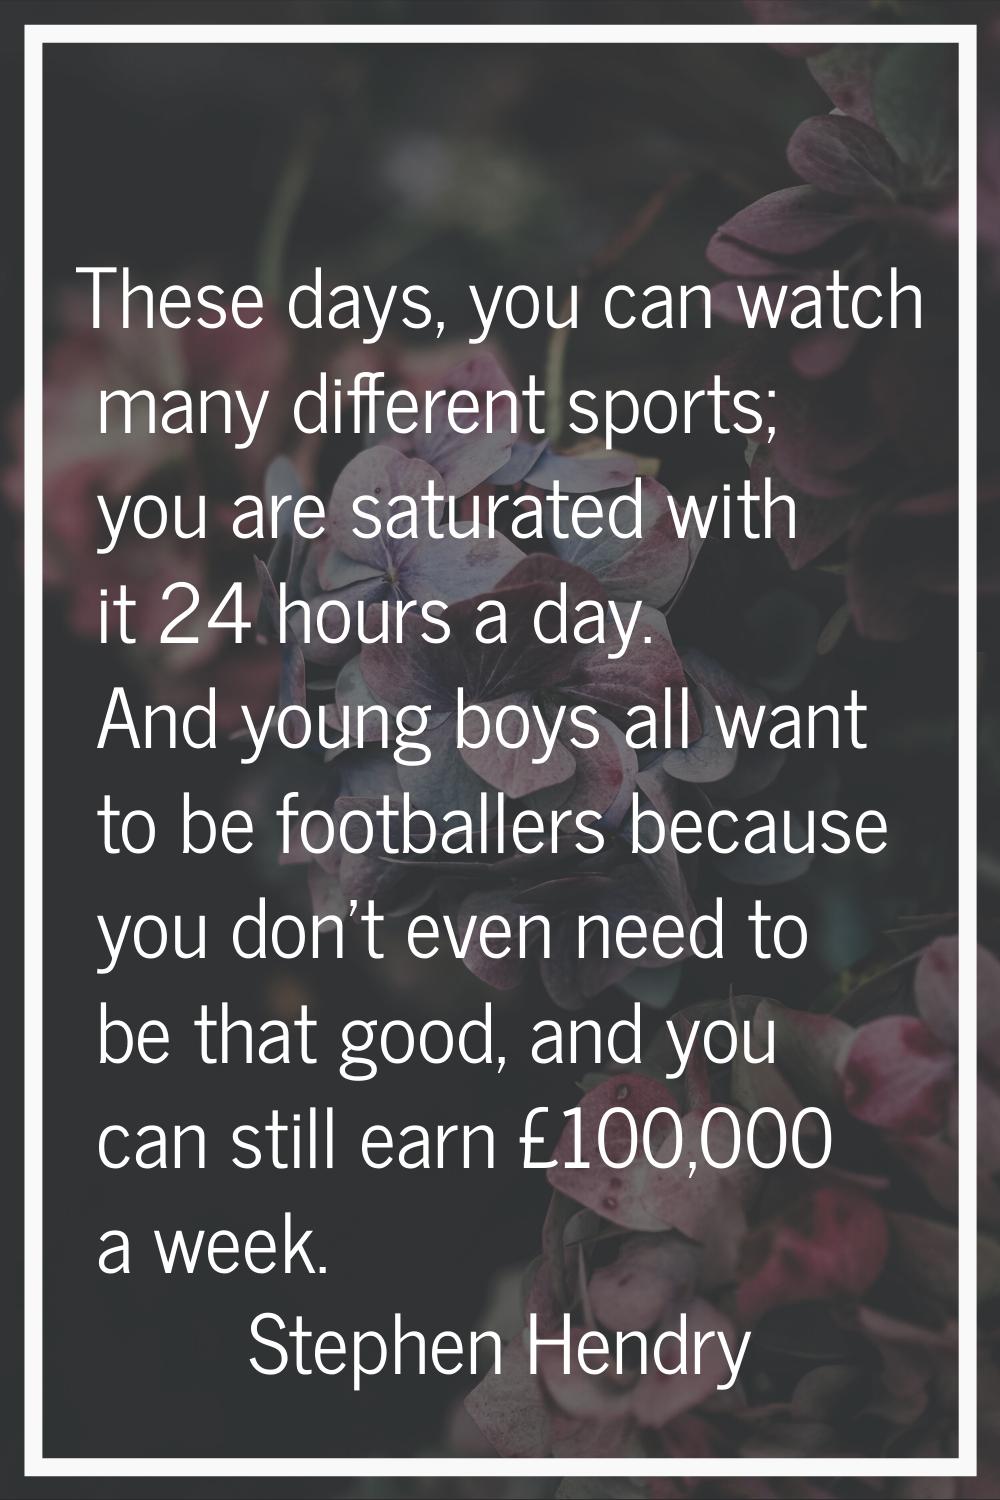 These days, you can watch many different sports; you are saturated with it 24 hours a day. And youn